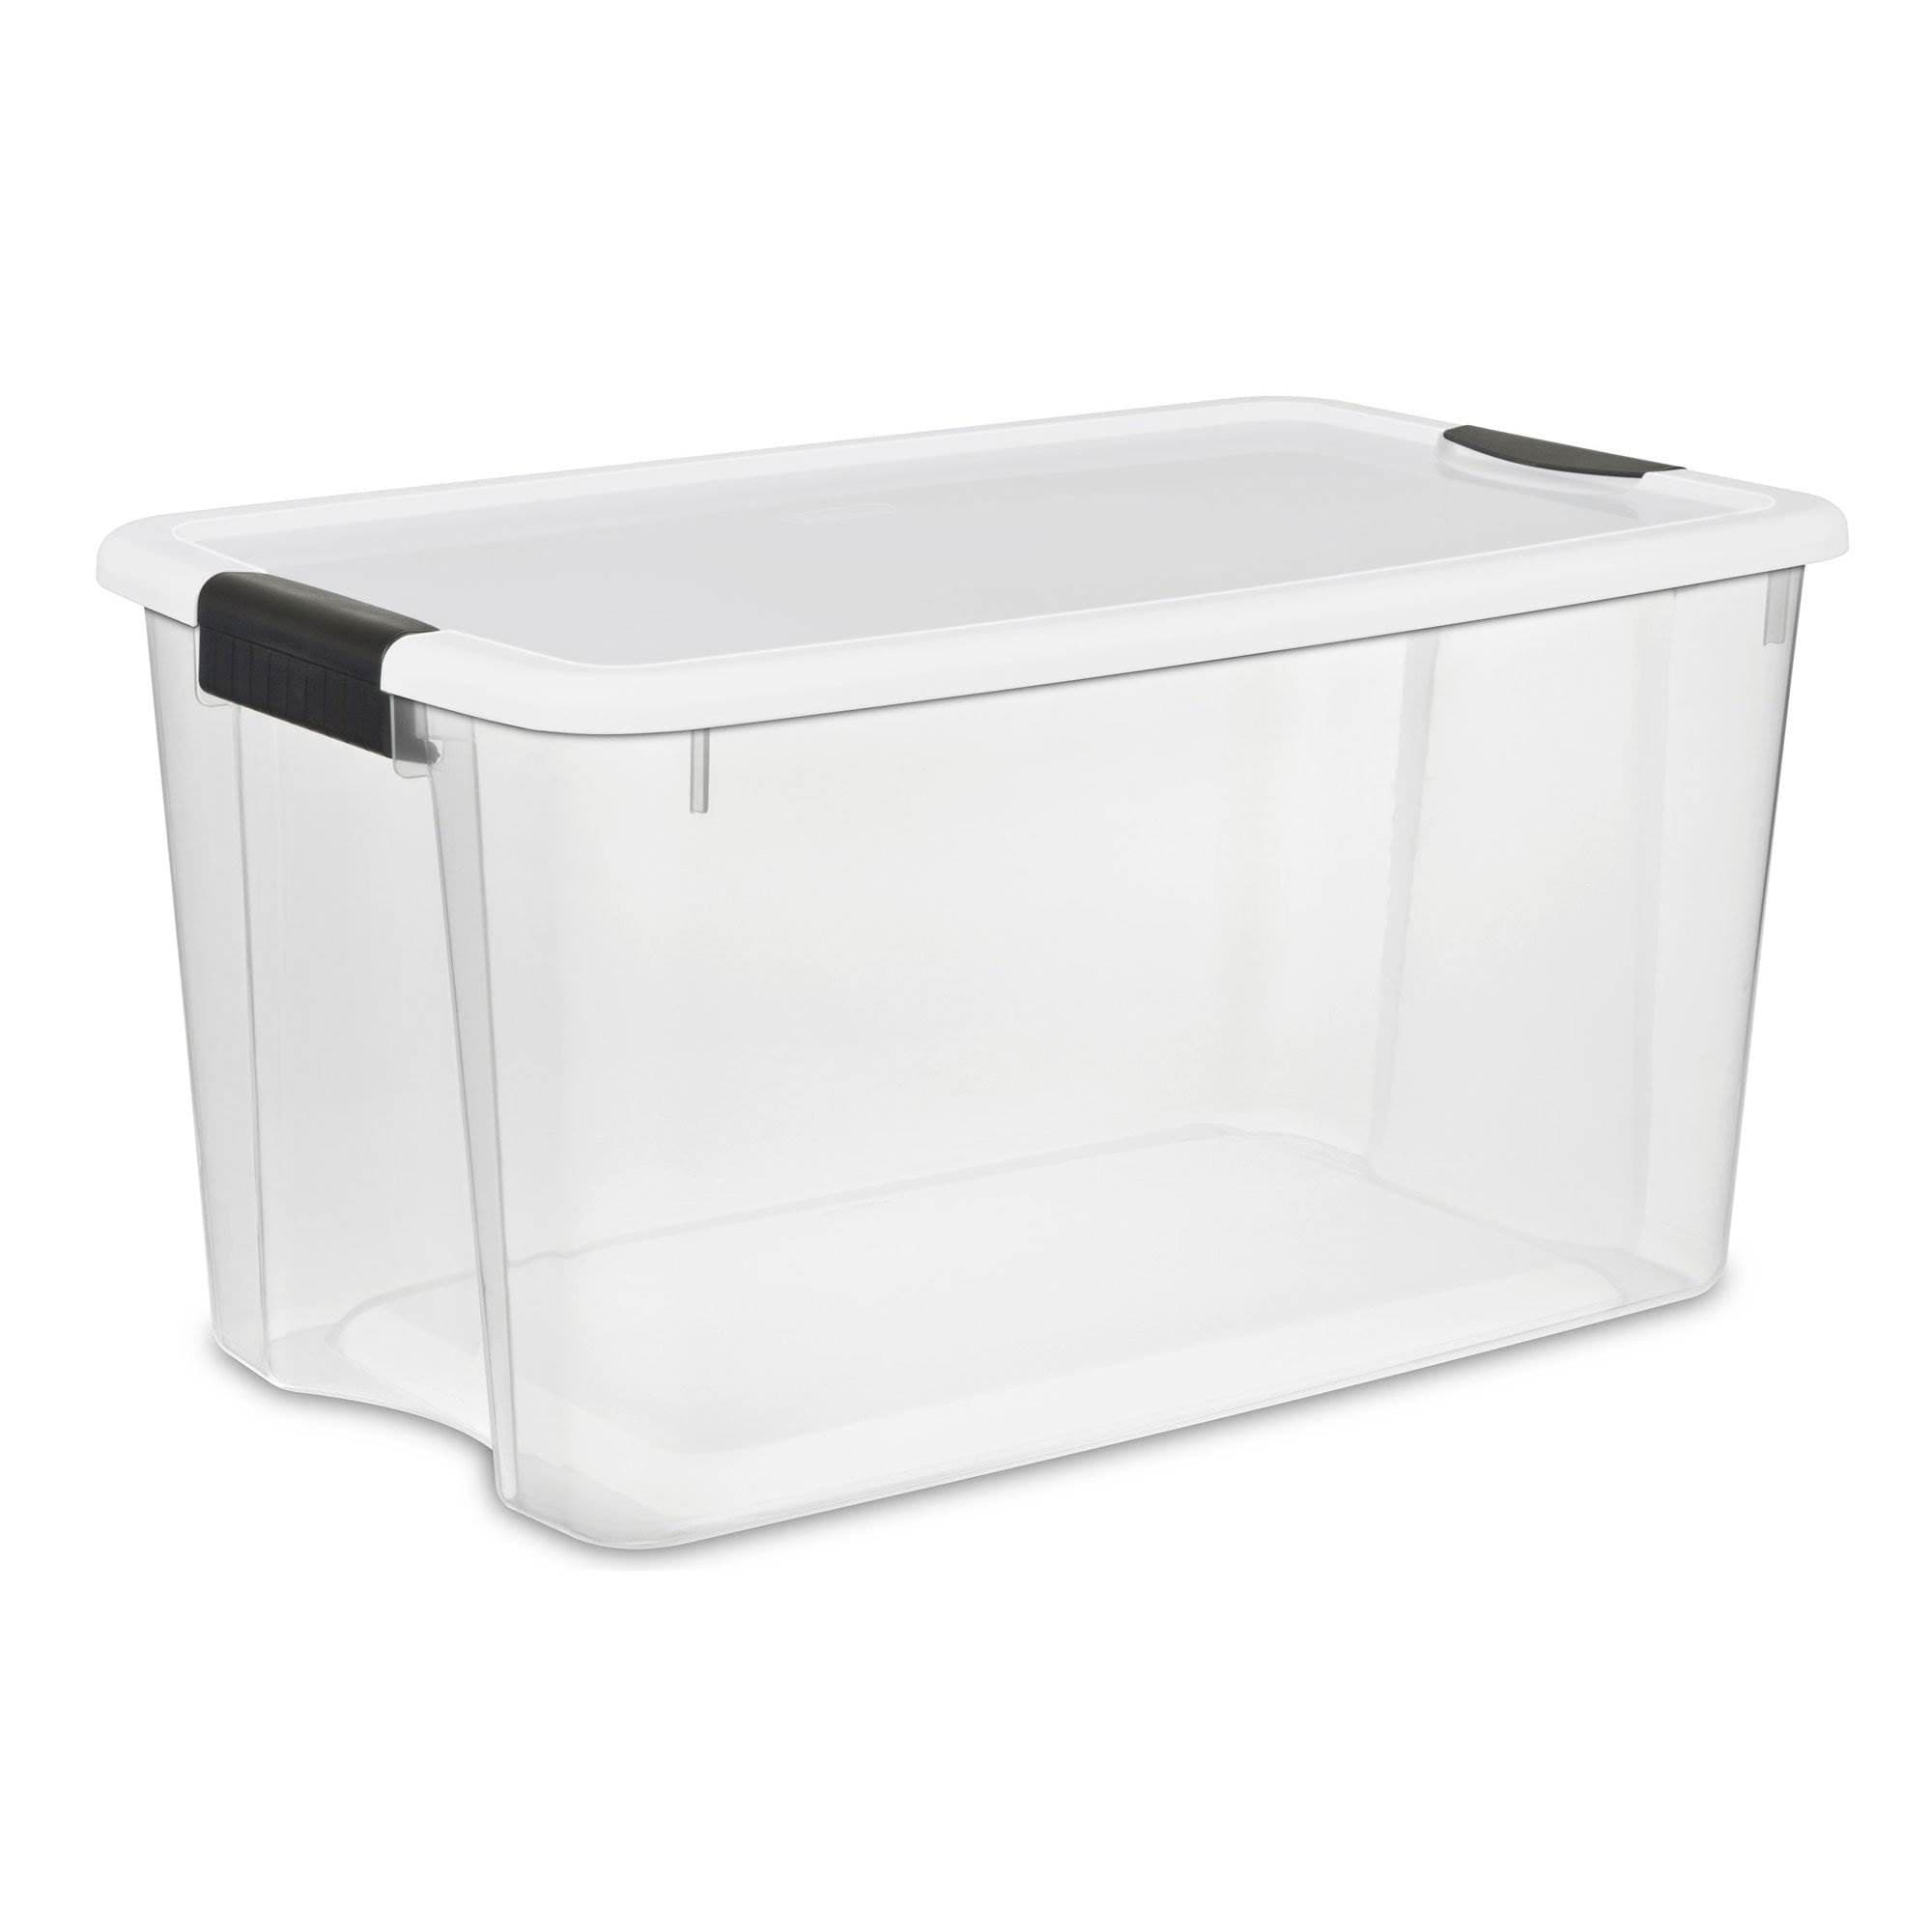 Sterilite Corporation Clear Plastic Storage Containers at Lowes.com